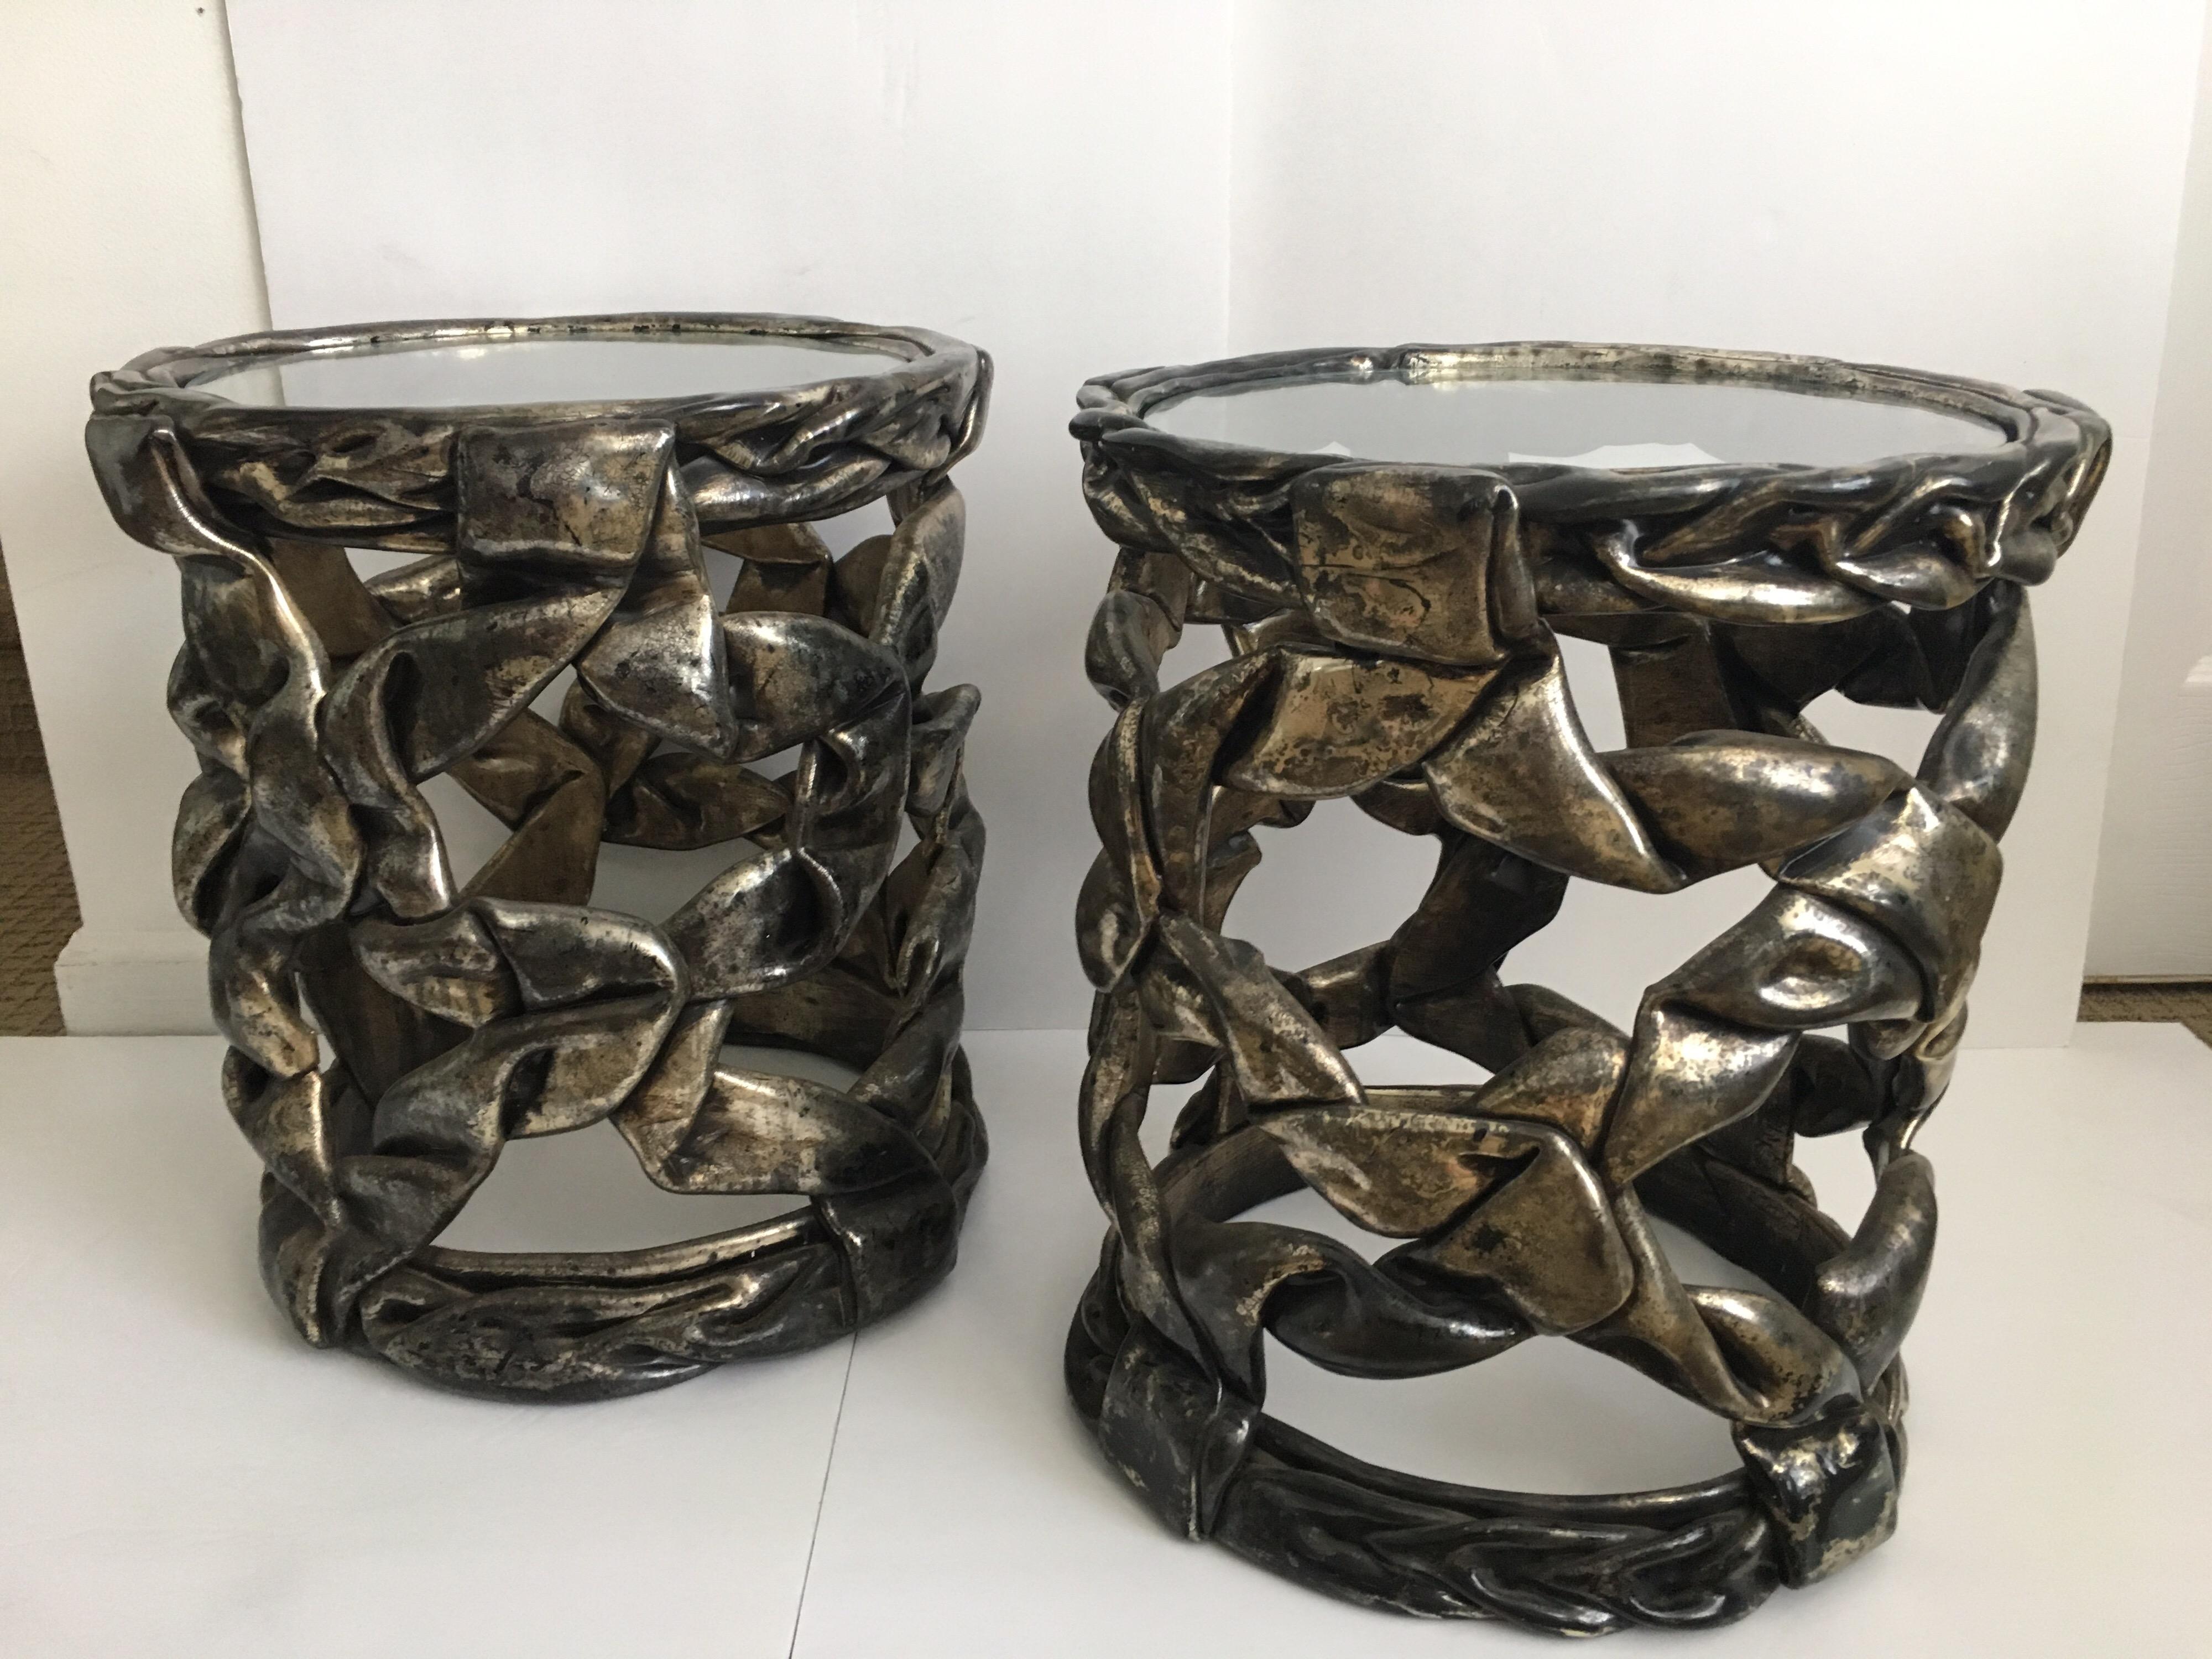 Pair of delicious candy ribbon occasional side tables in the Hollywood Regency style of Tony Duquette. Can be placed together to make an interesting center cocktail table grouping. Original silver leaf finish with natural patina showing gunmetal